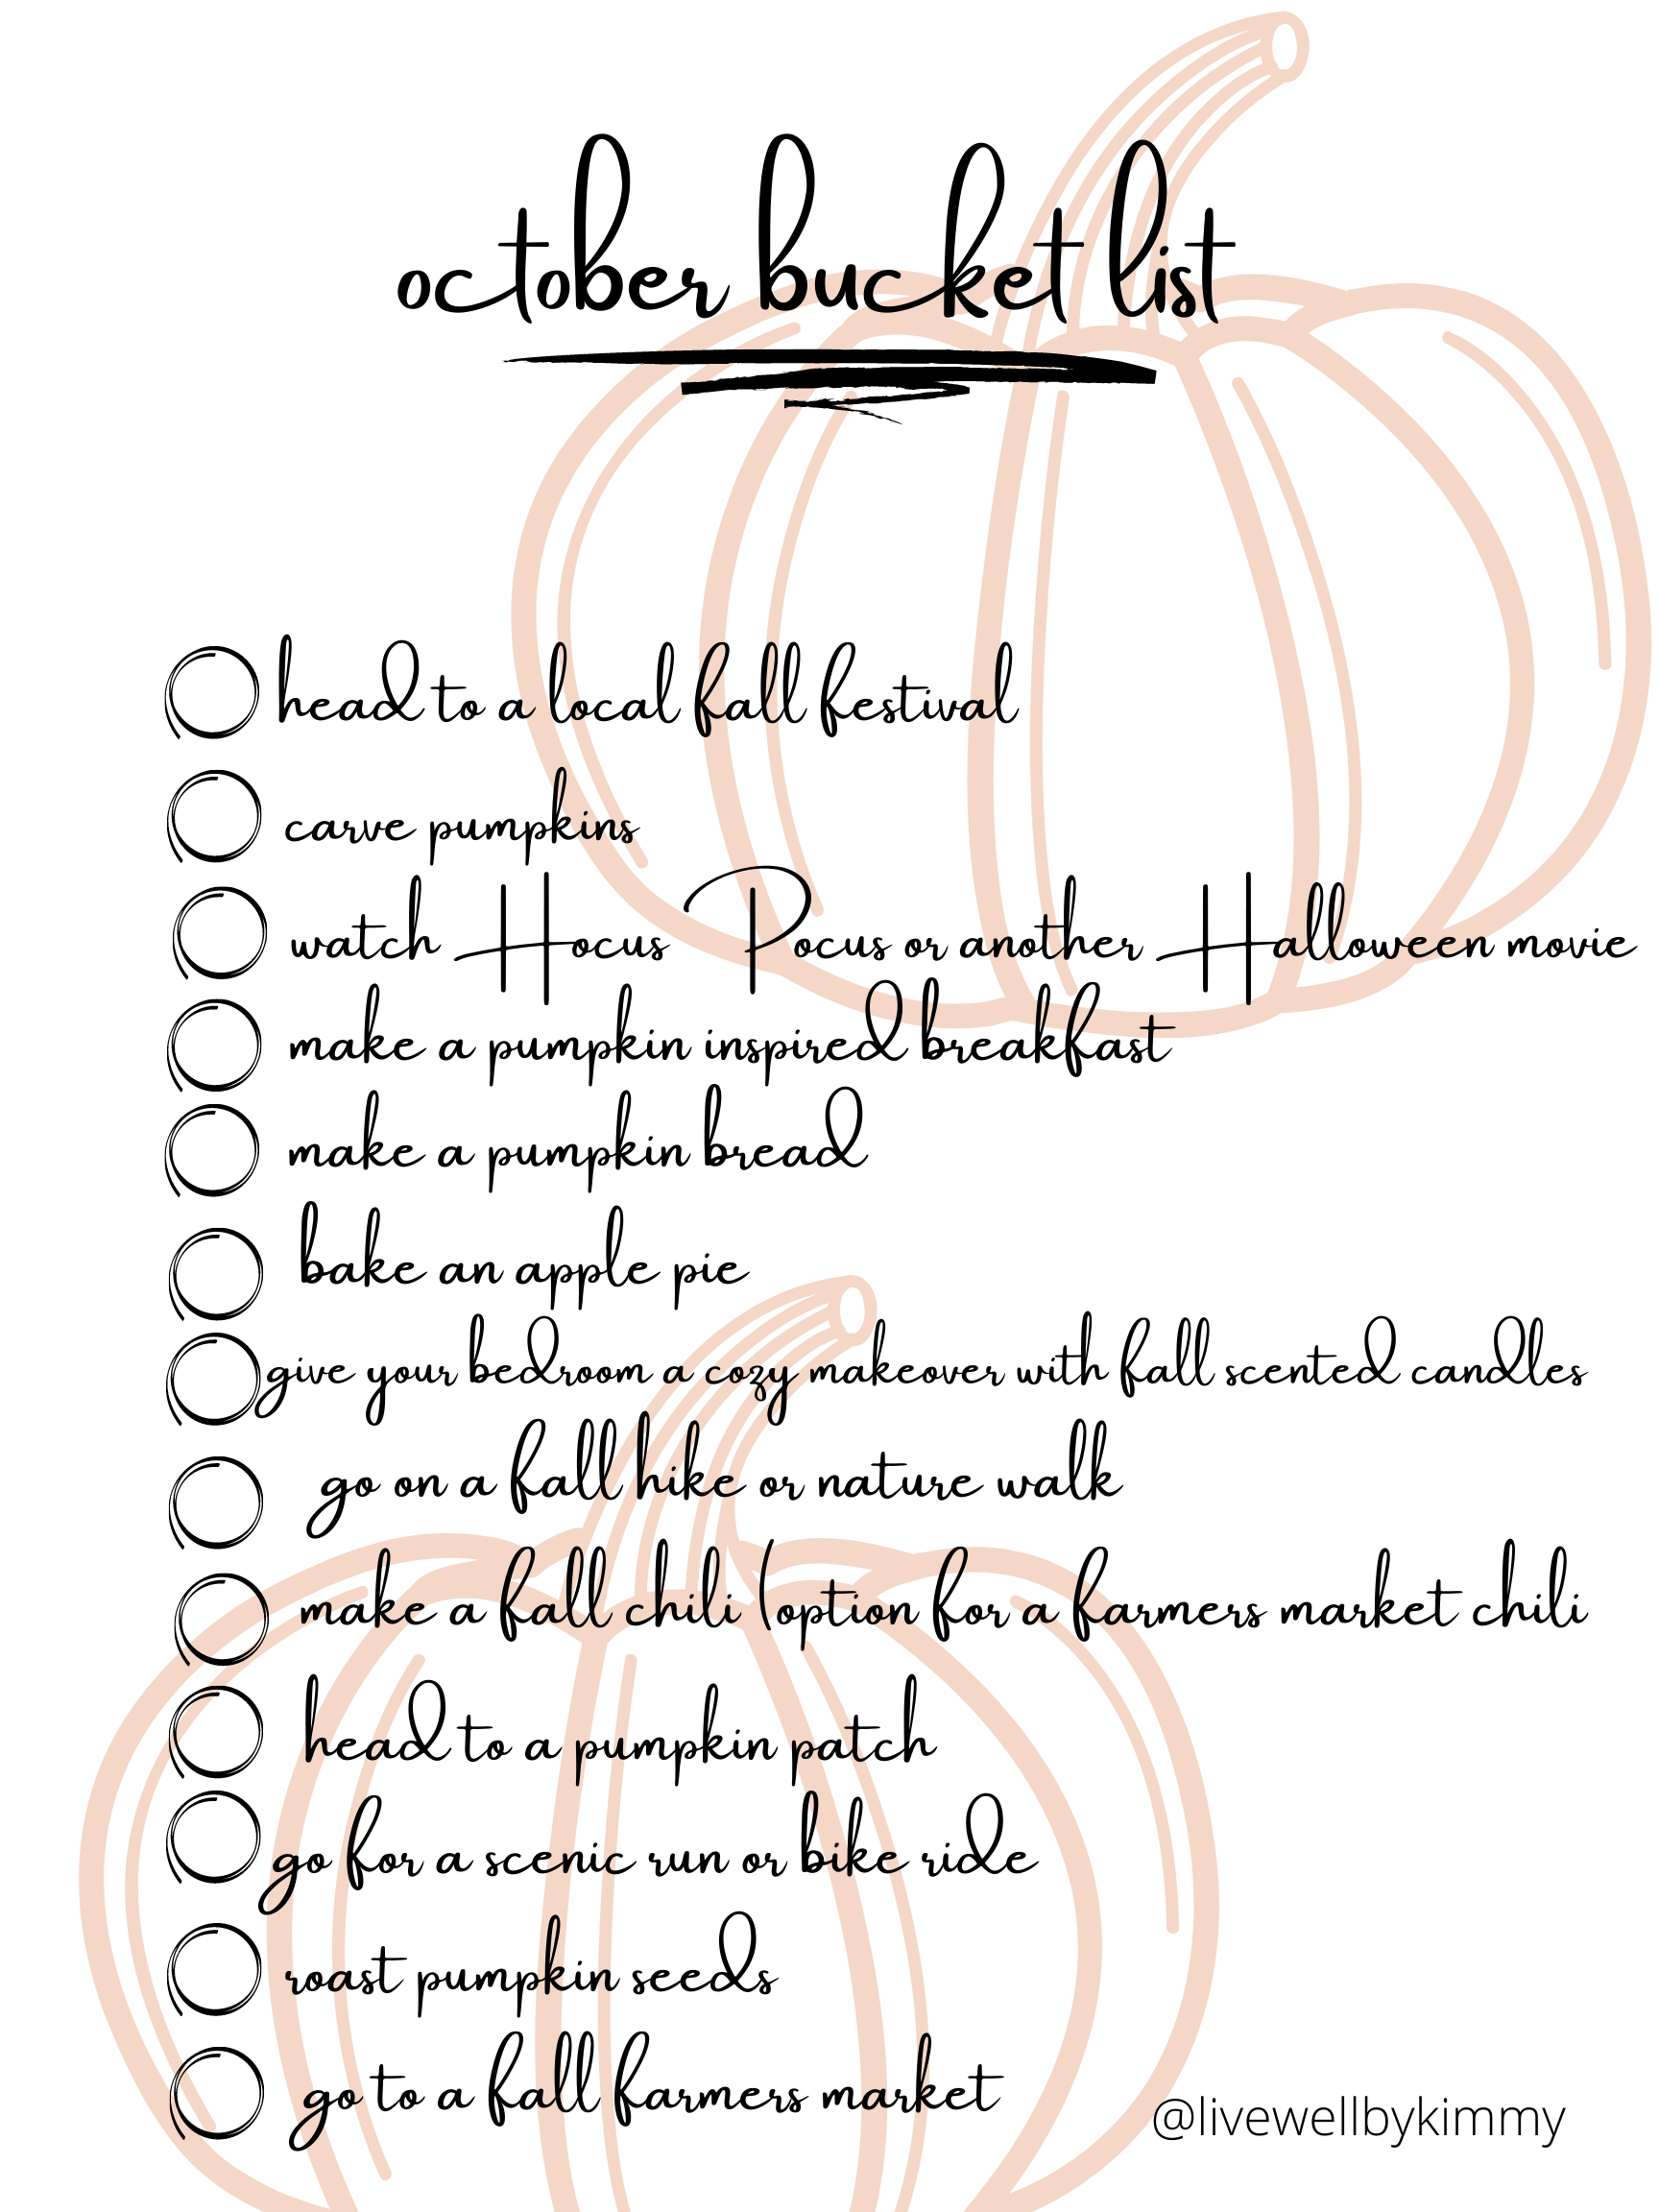 October Bucket List — Live Well by Kimmy